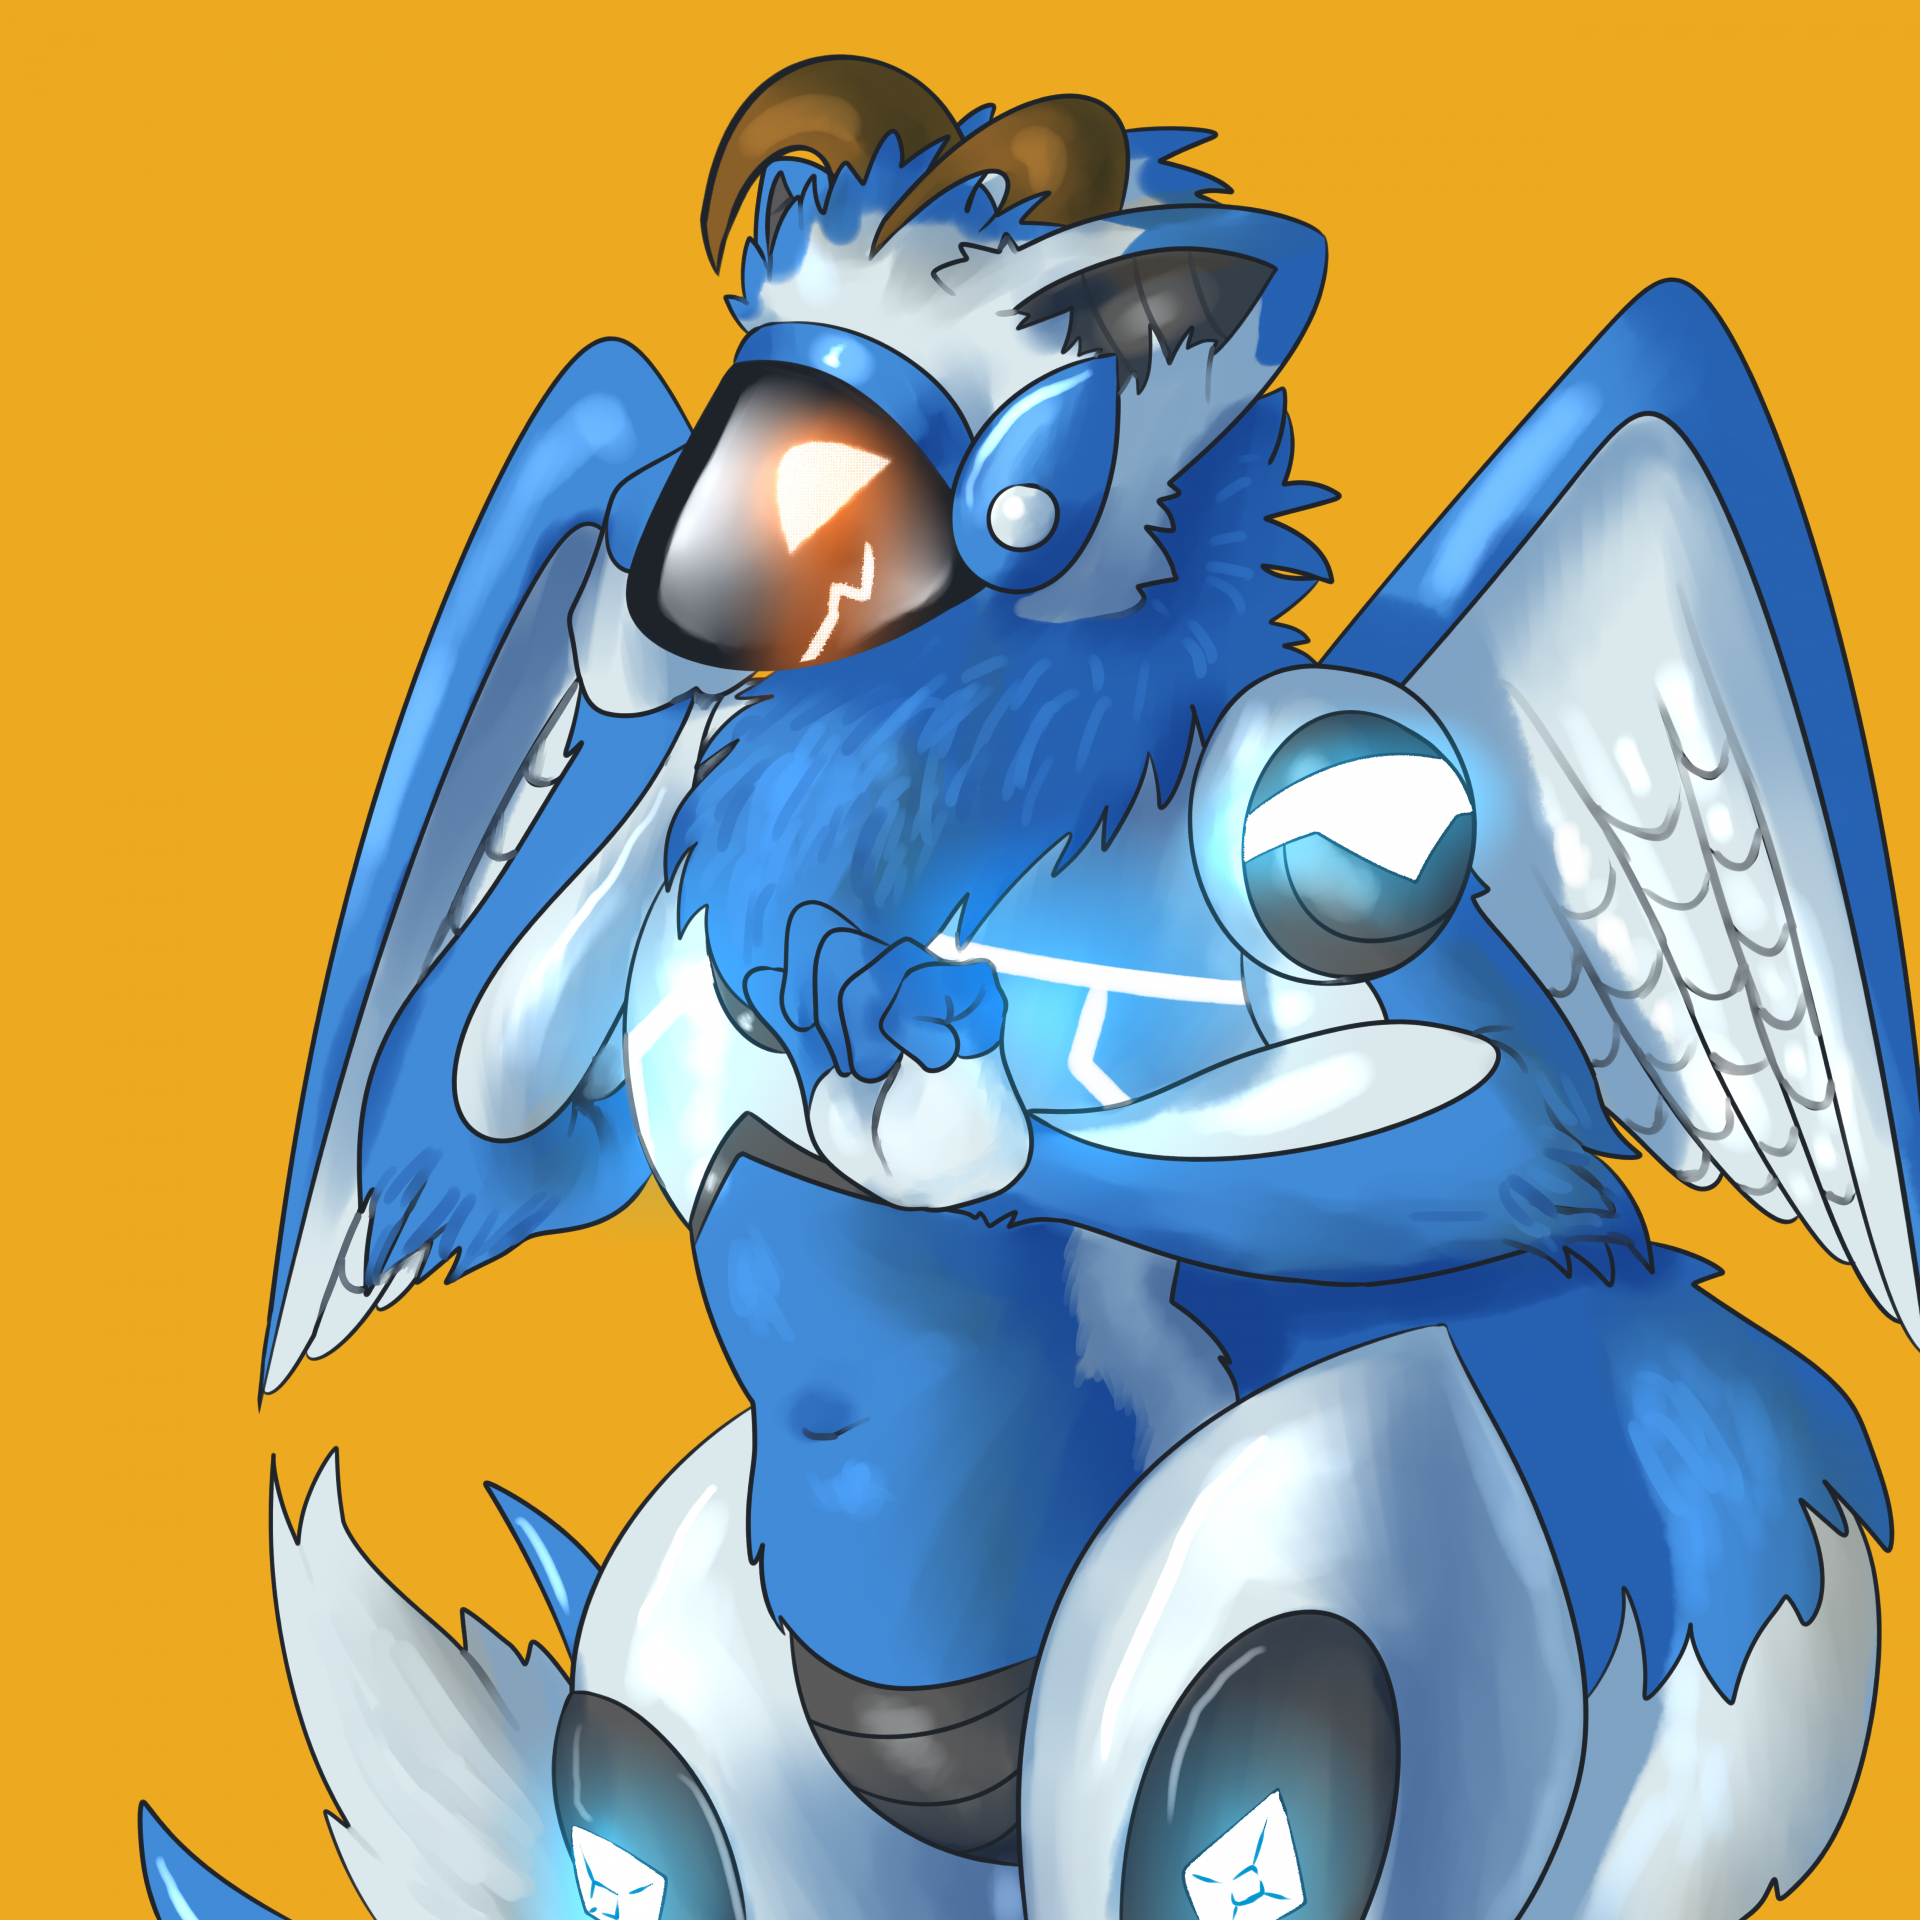 Protogen furry with wings